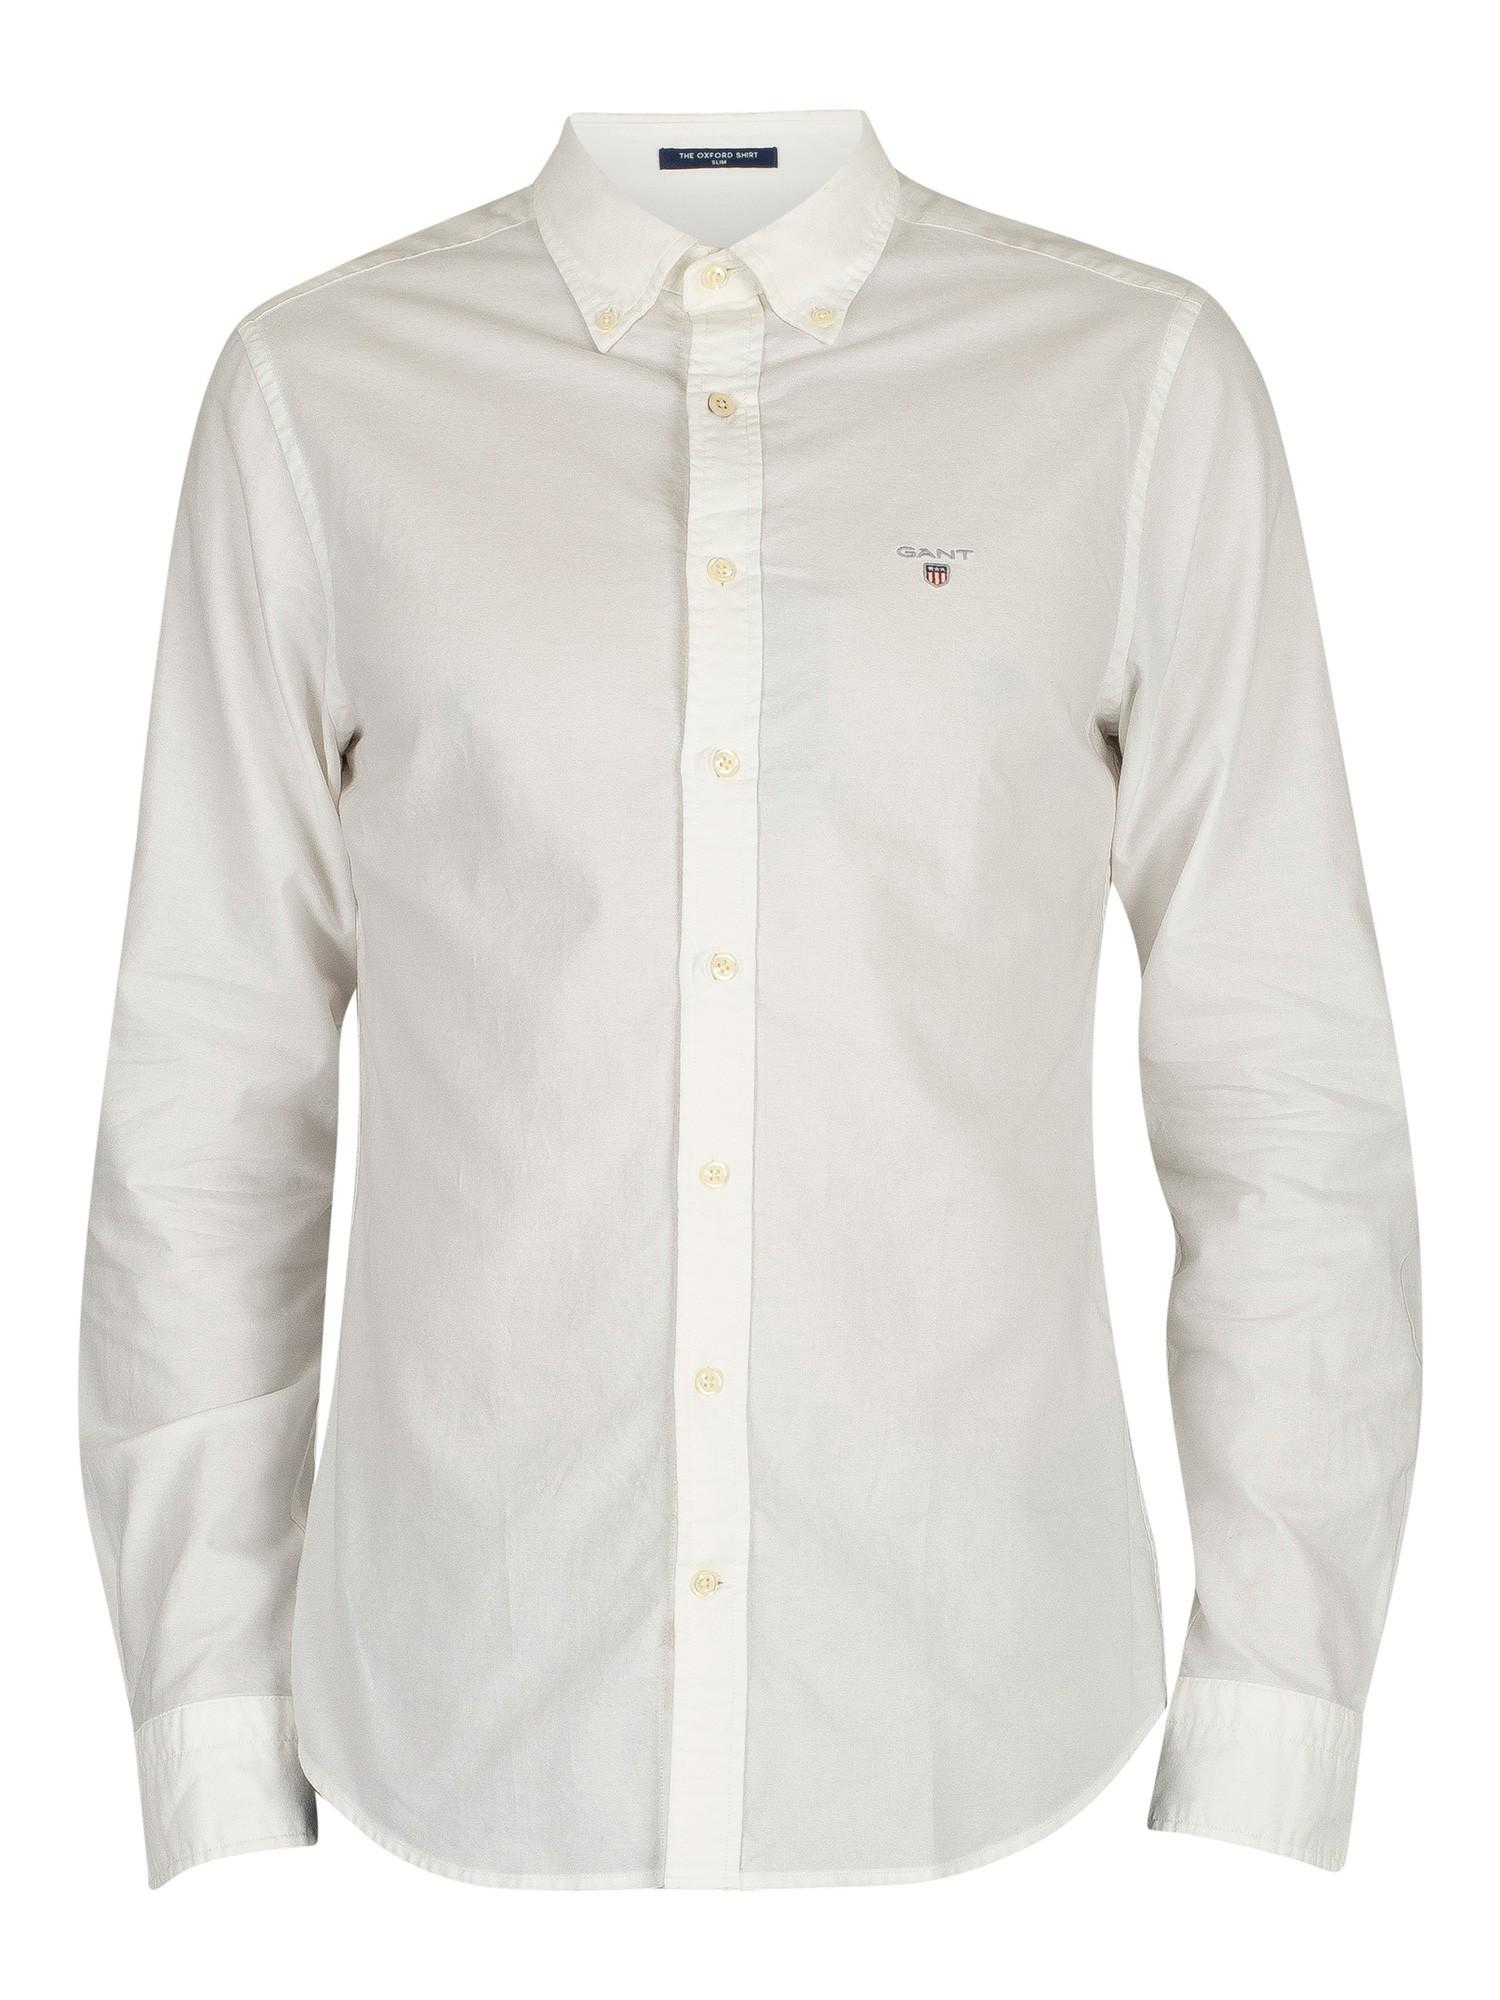 GANT Cotton The Slim Oxford Shirt in White for Men - Save 17% - Lyst